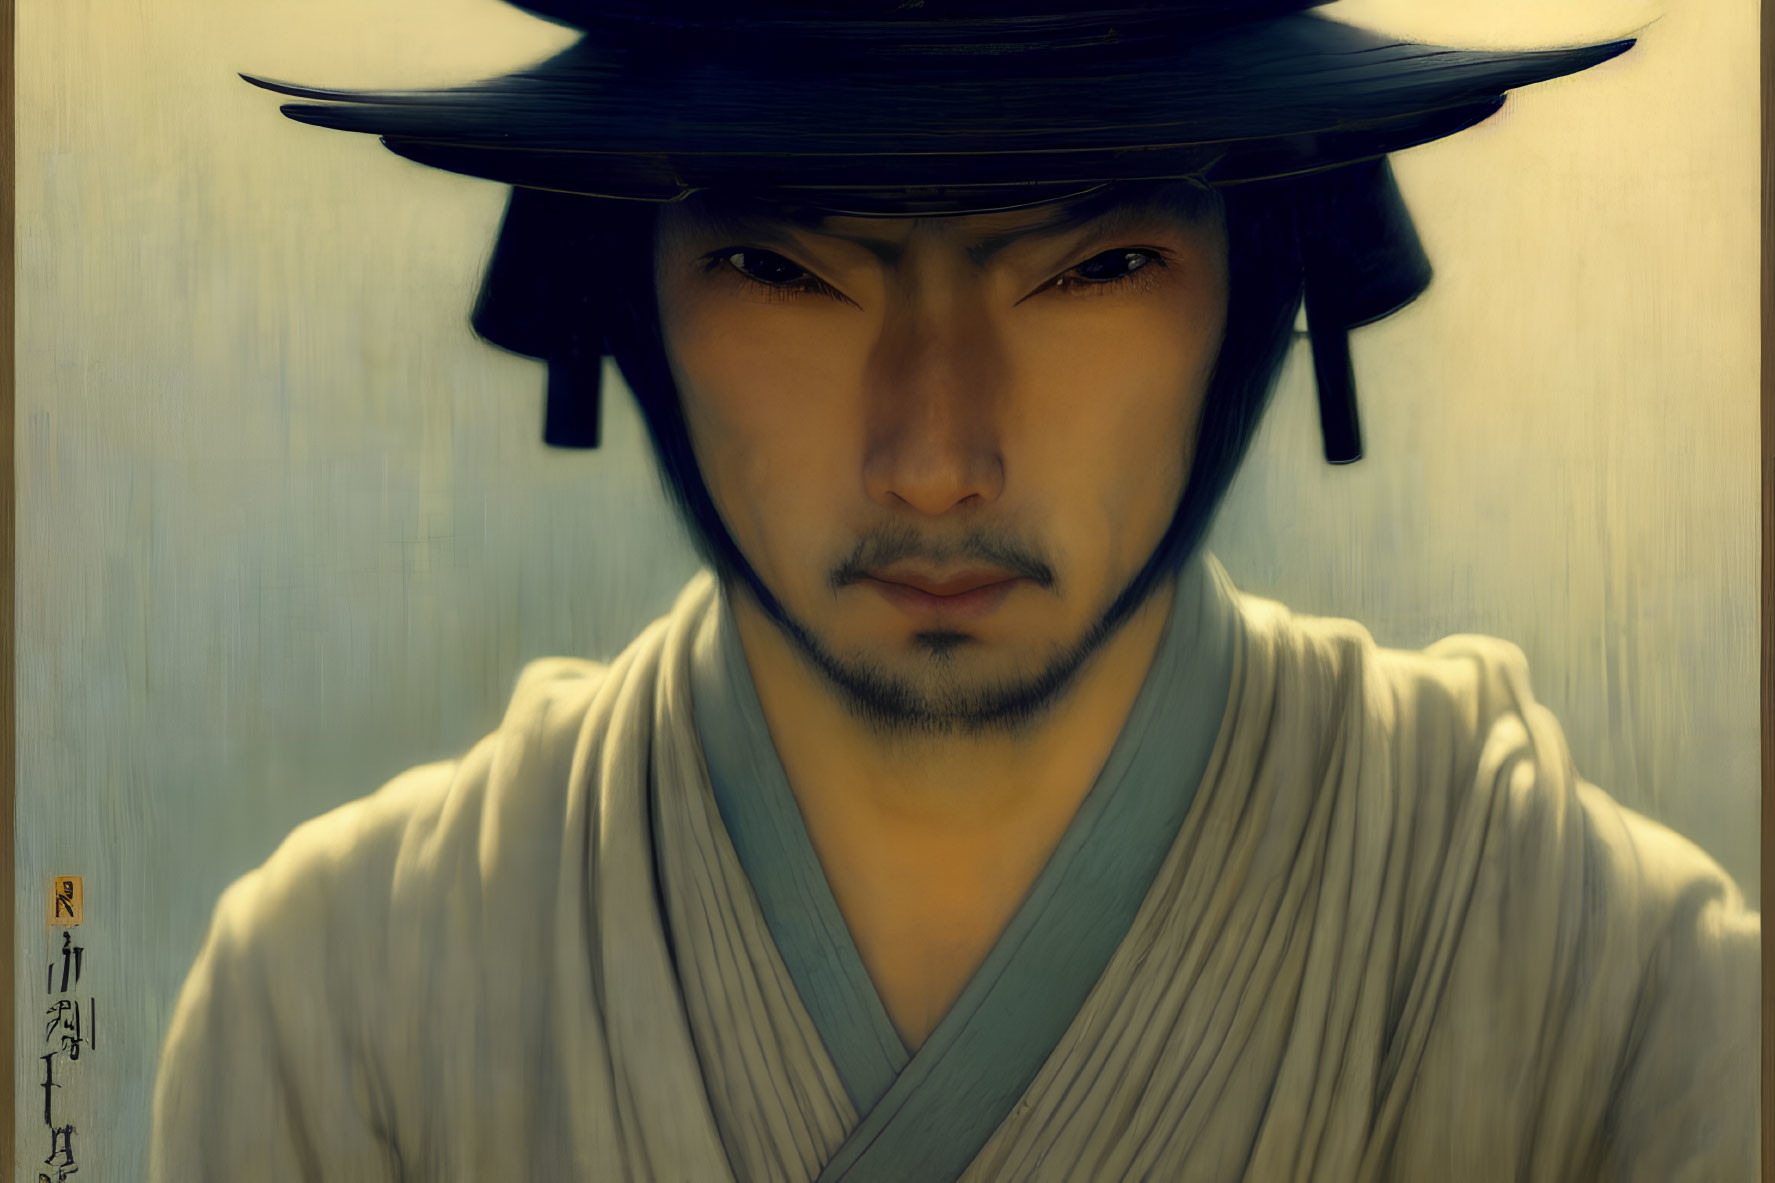 Portrait of a man with East Asian features in black hat, with intense gaze and ancient script.